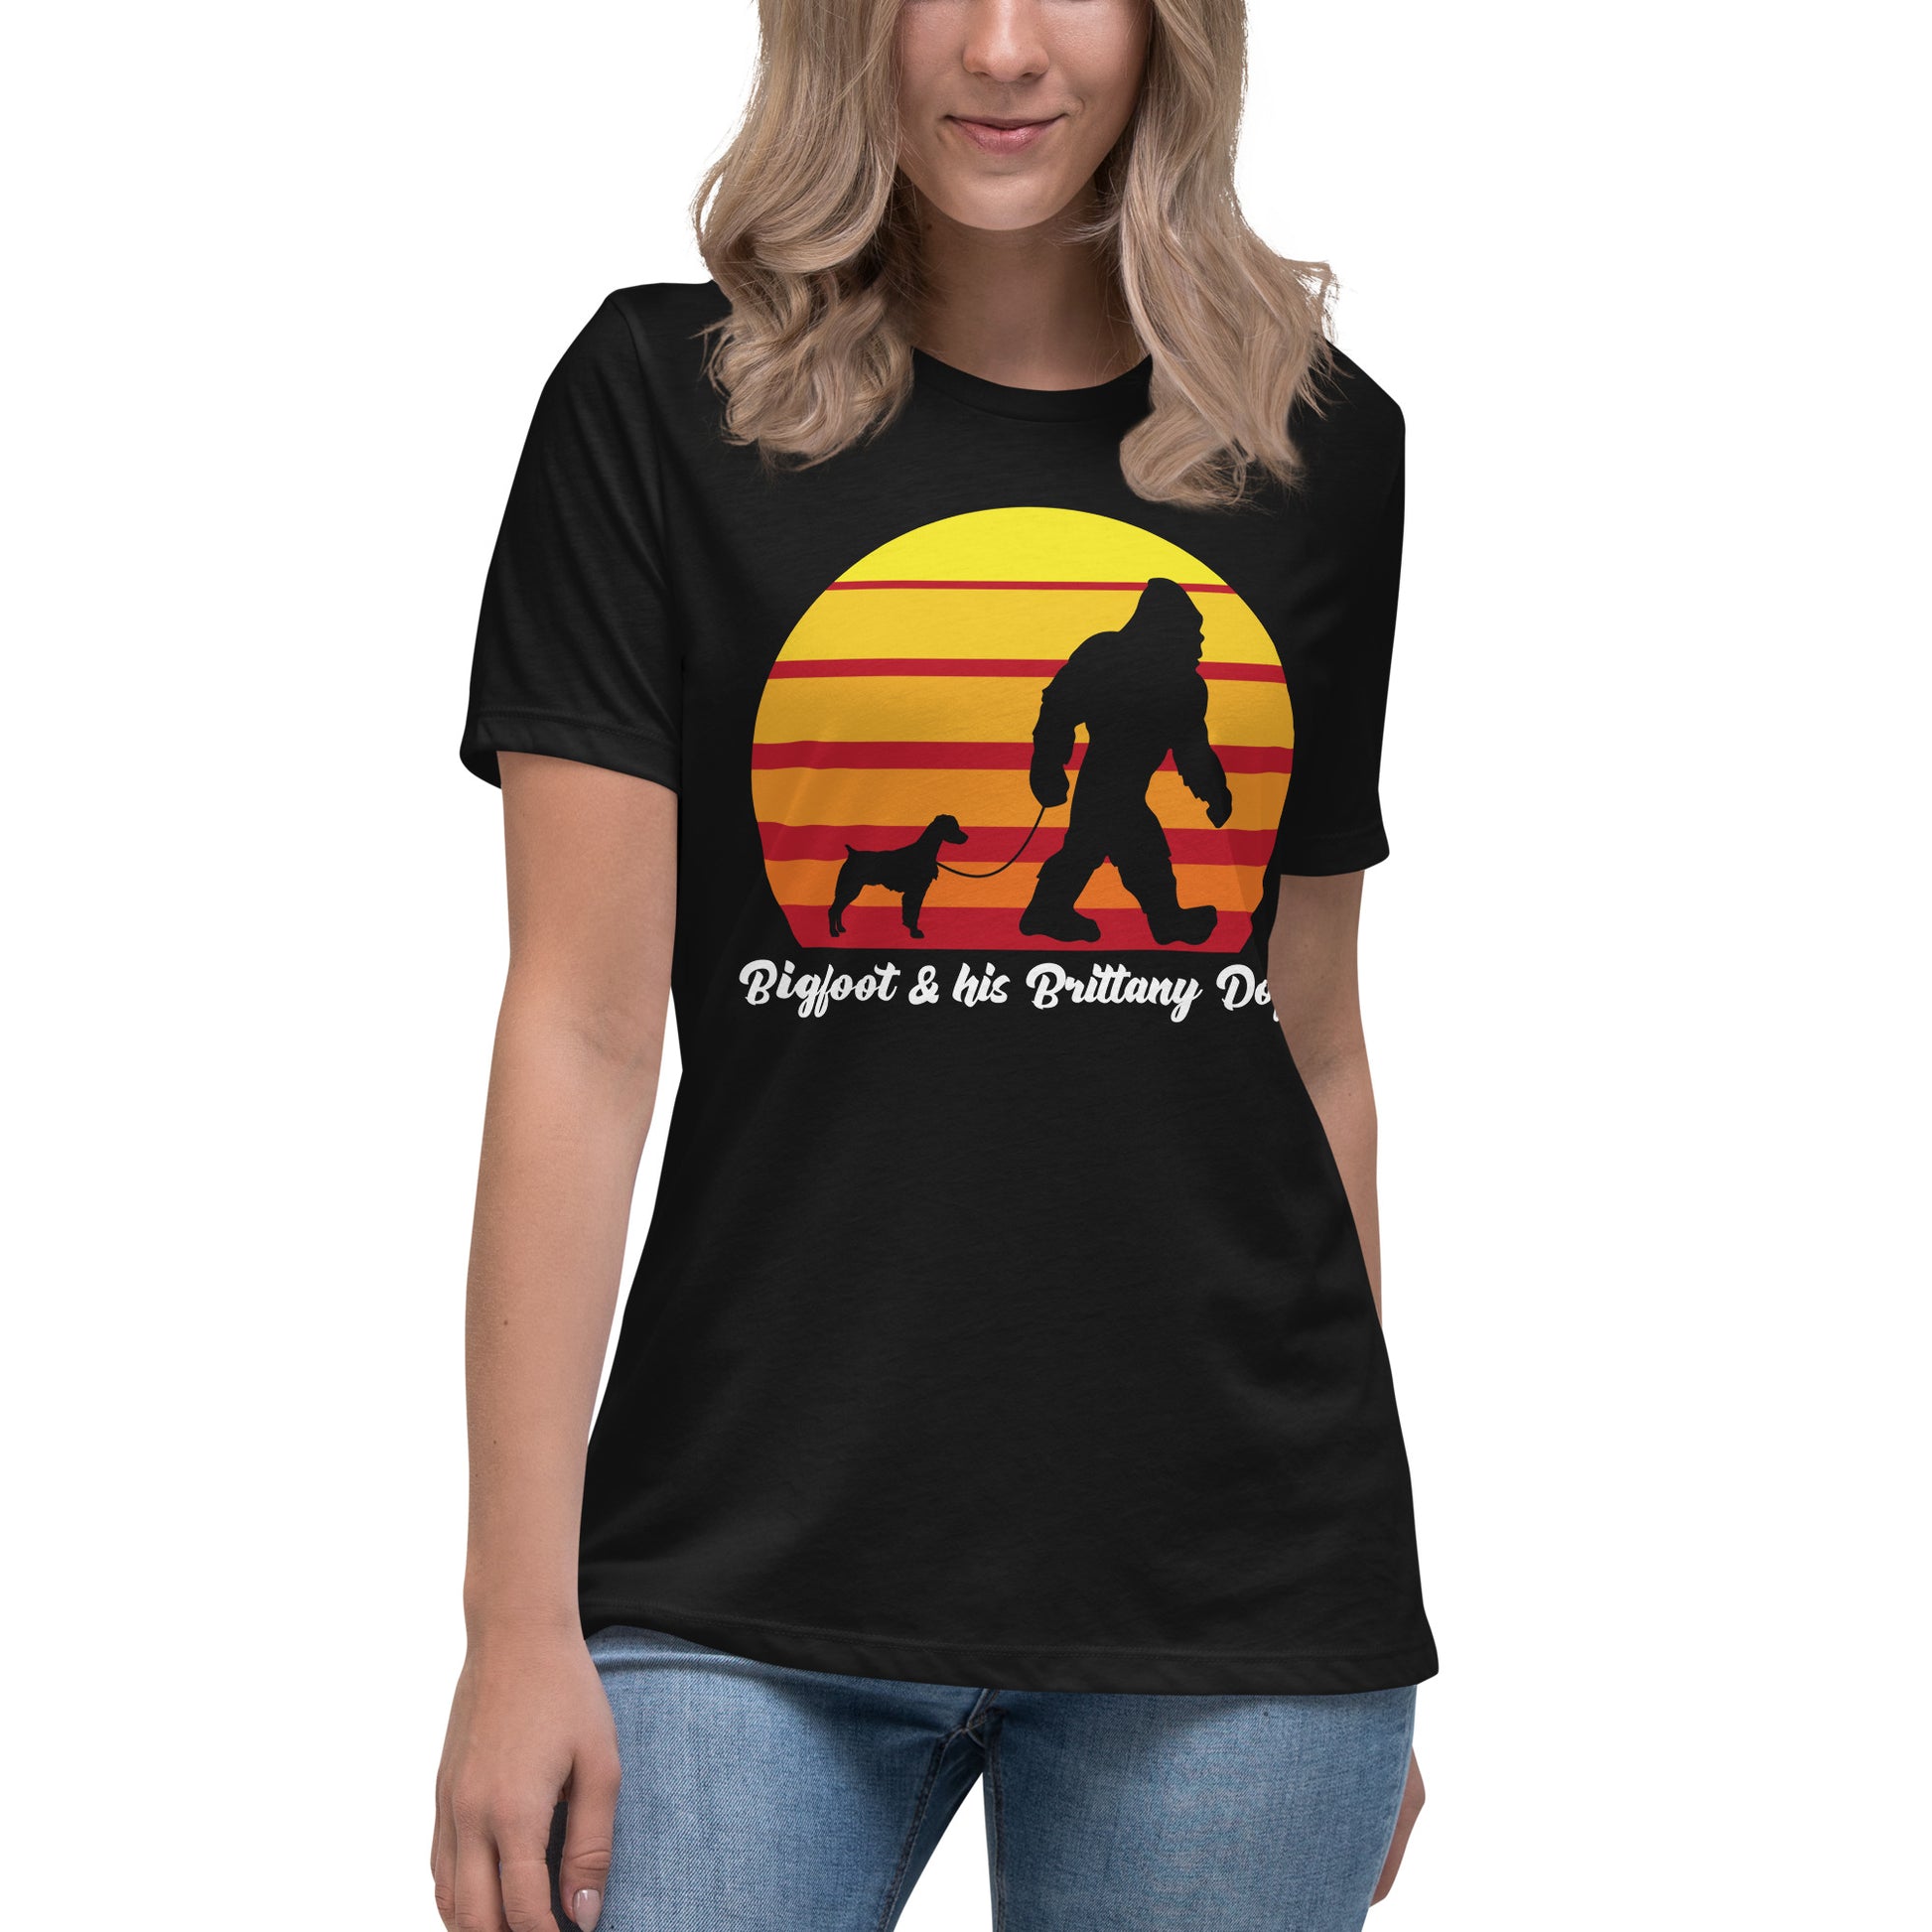 Big foot and his Brittany dog women’s black t-shirt by Dog Artistry.